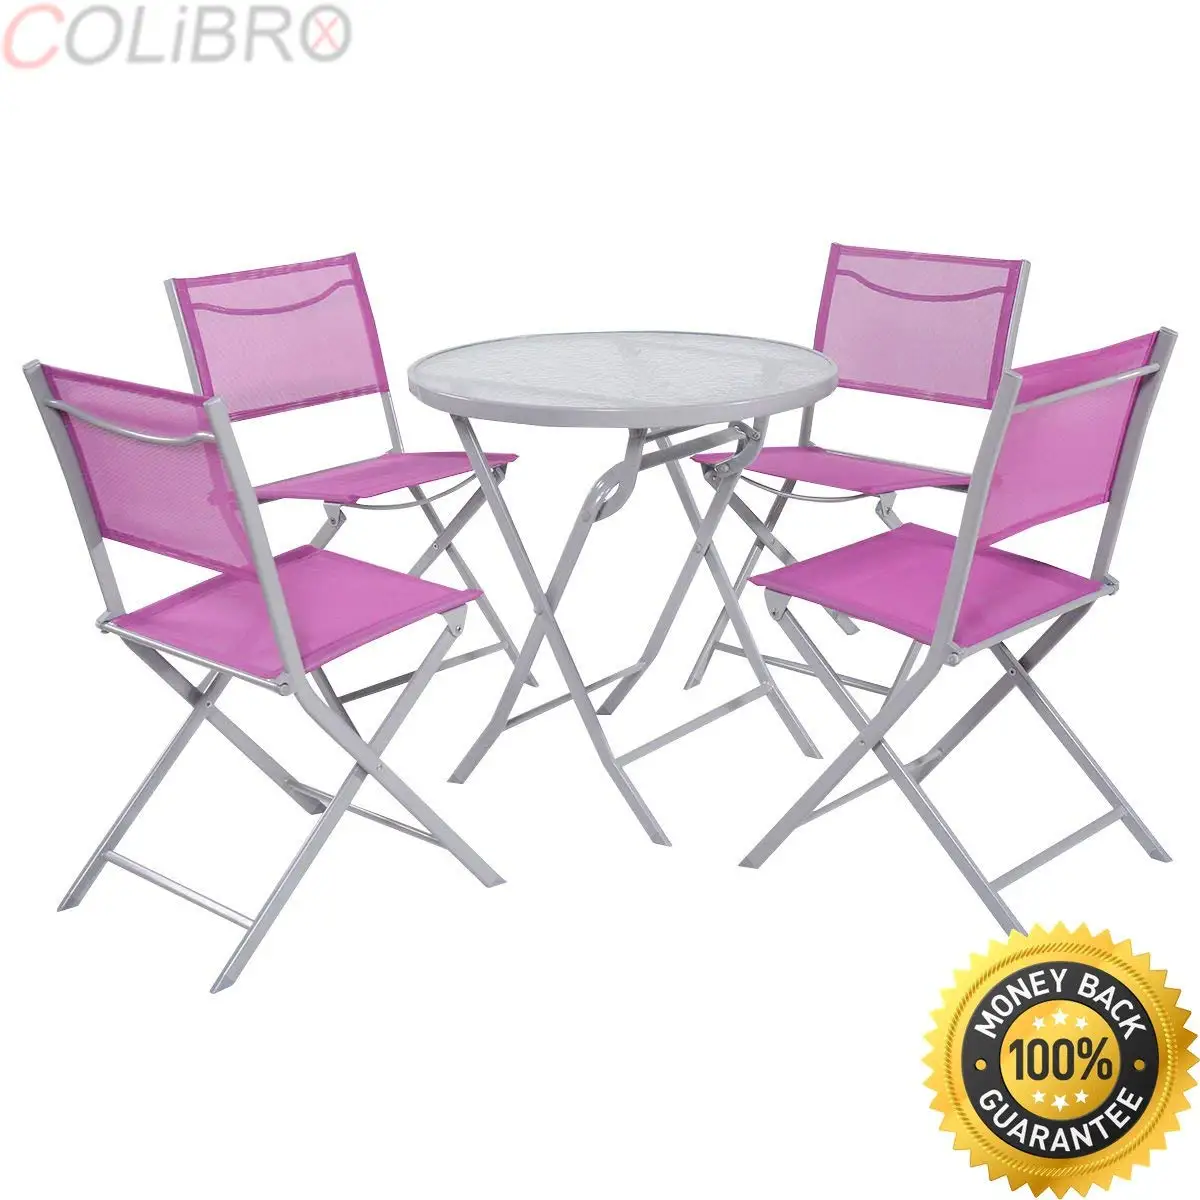 Cheap Folding Table Patio, find Folding Table Patio deals on line at